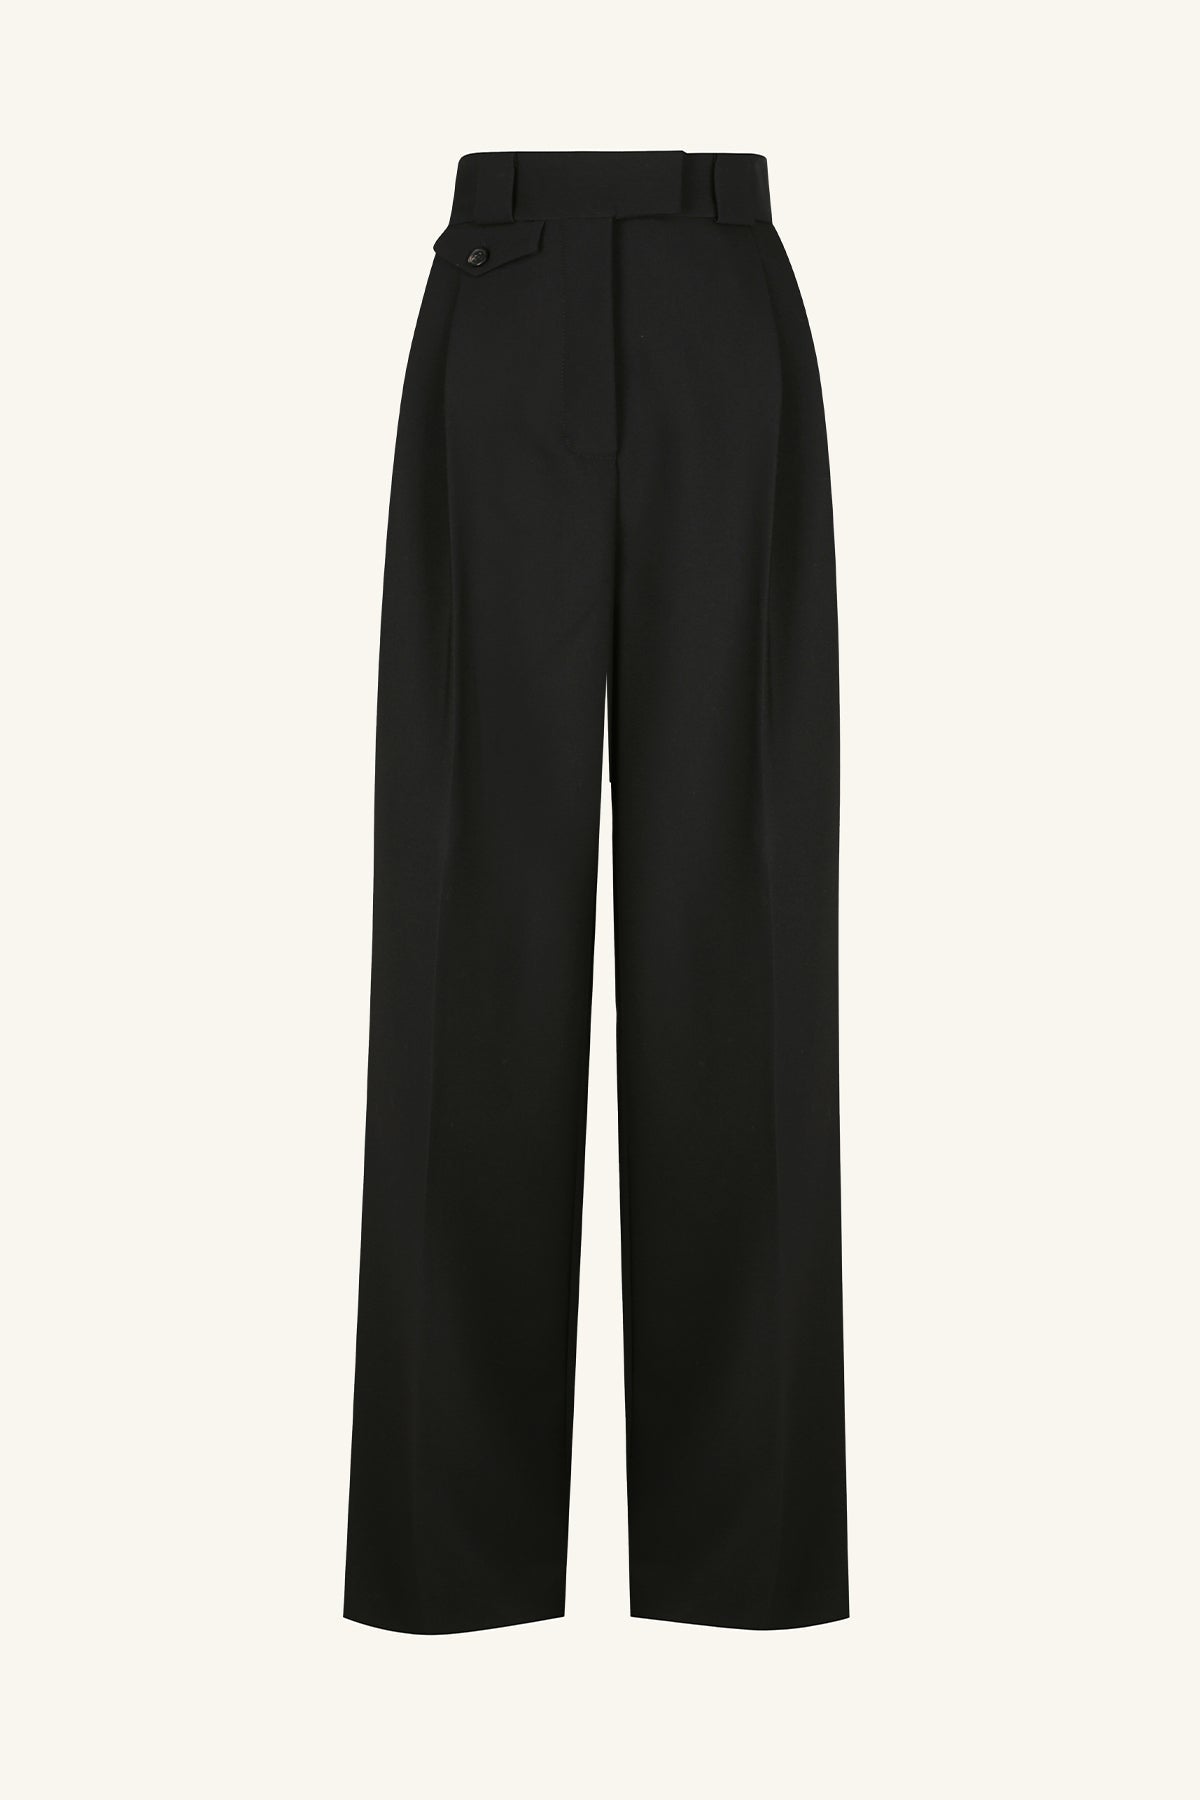 Irena High Waisted Tailored Pant, Black, Pants